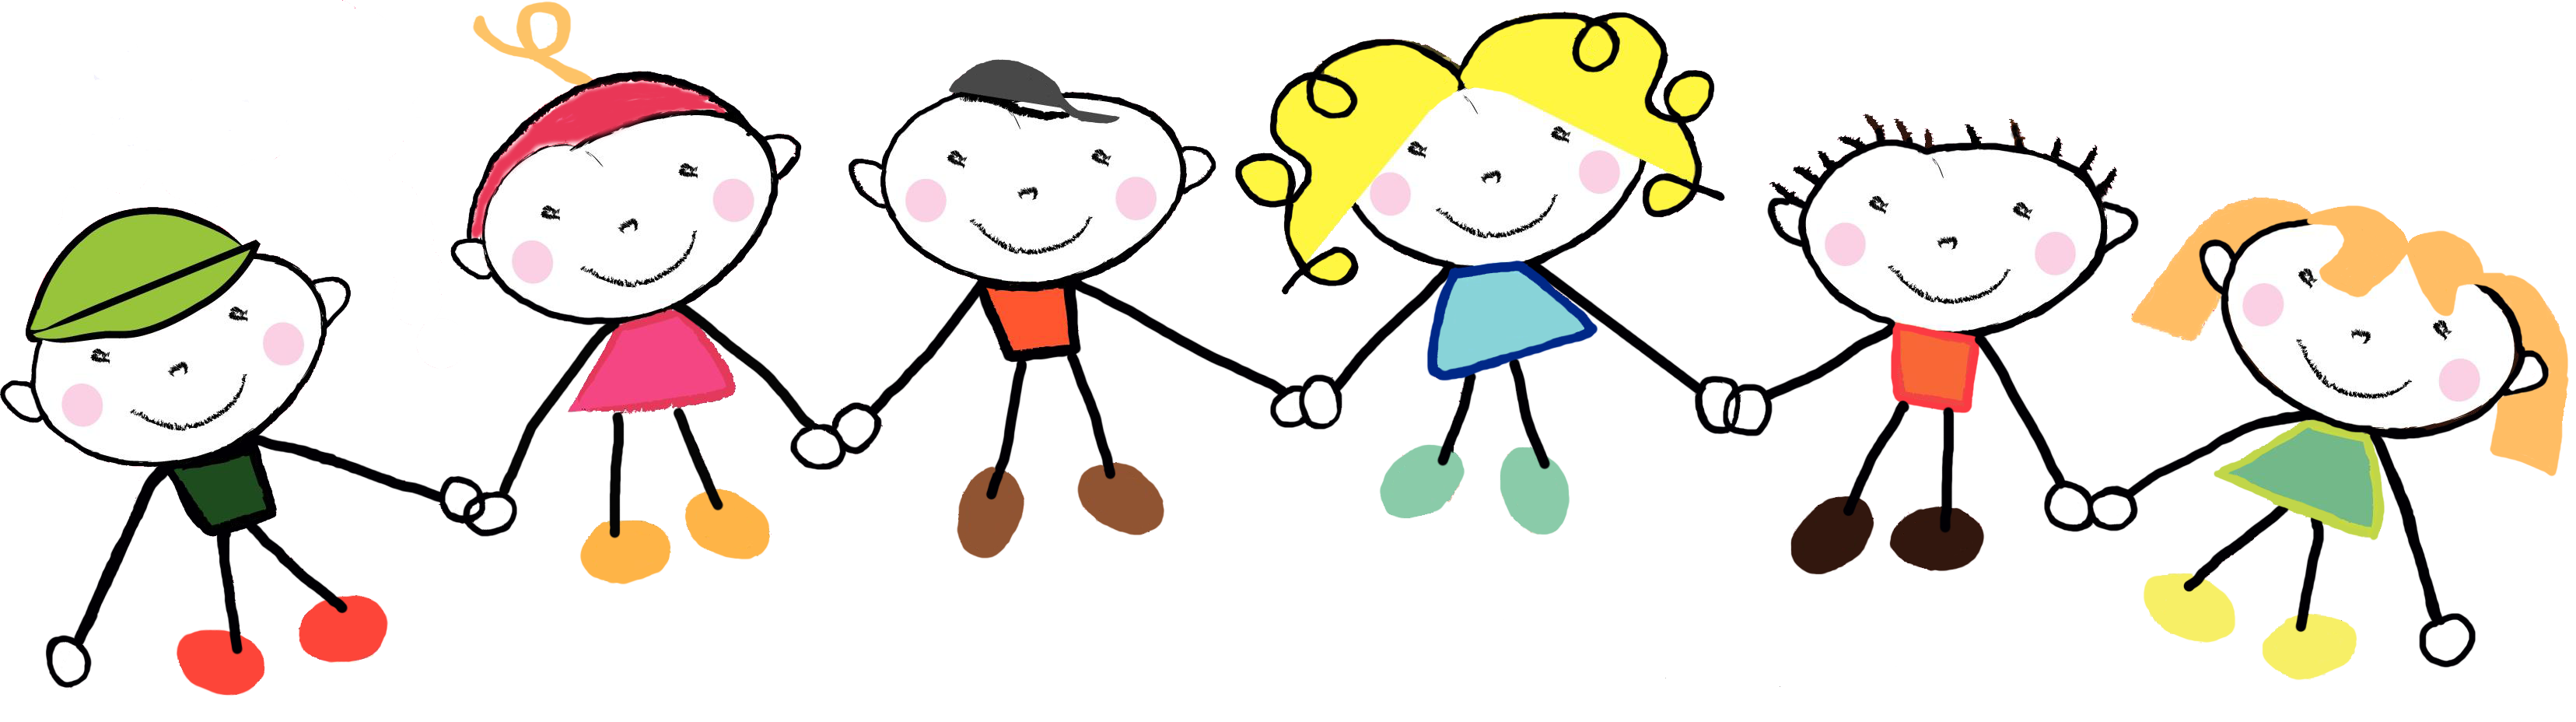 Niños PNG Picture